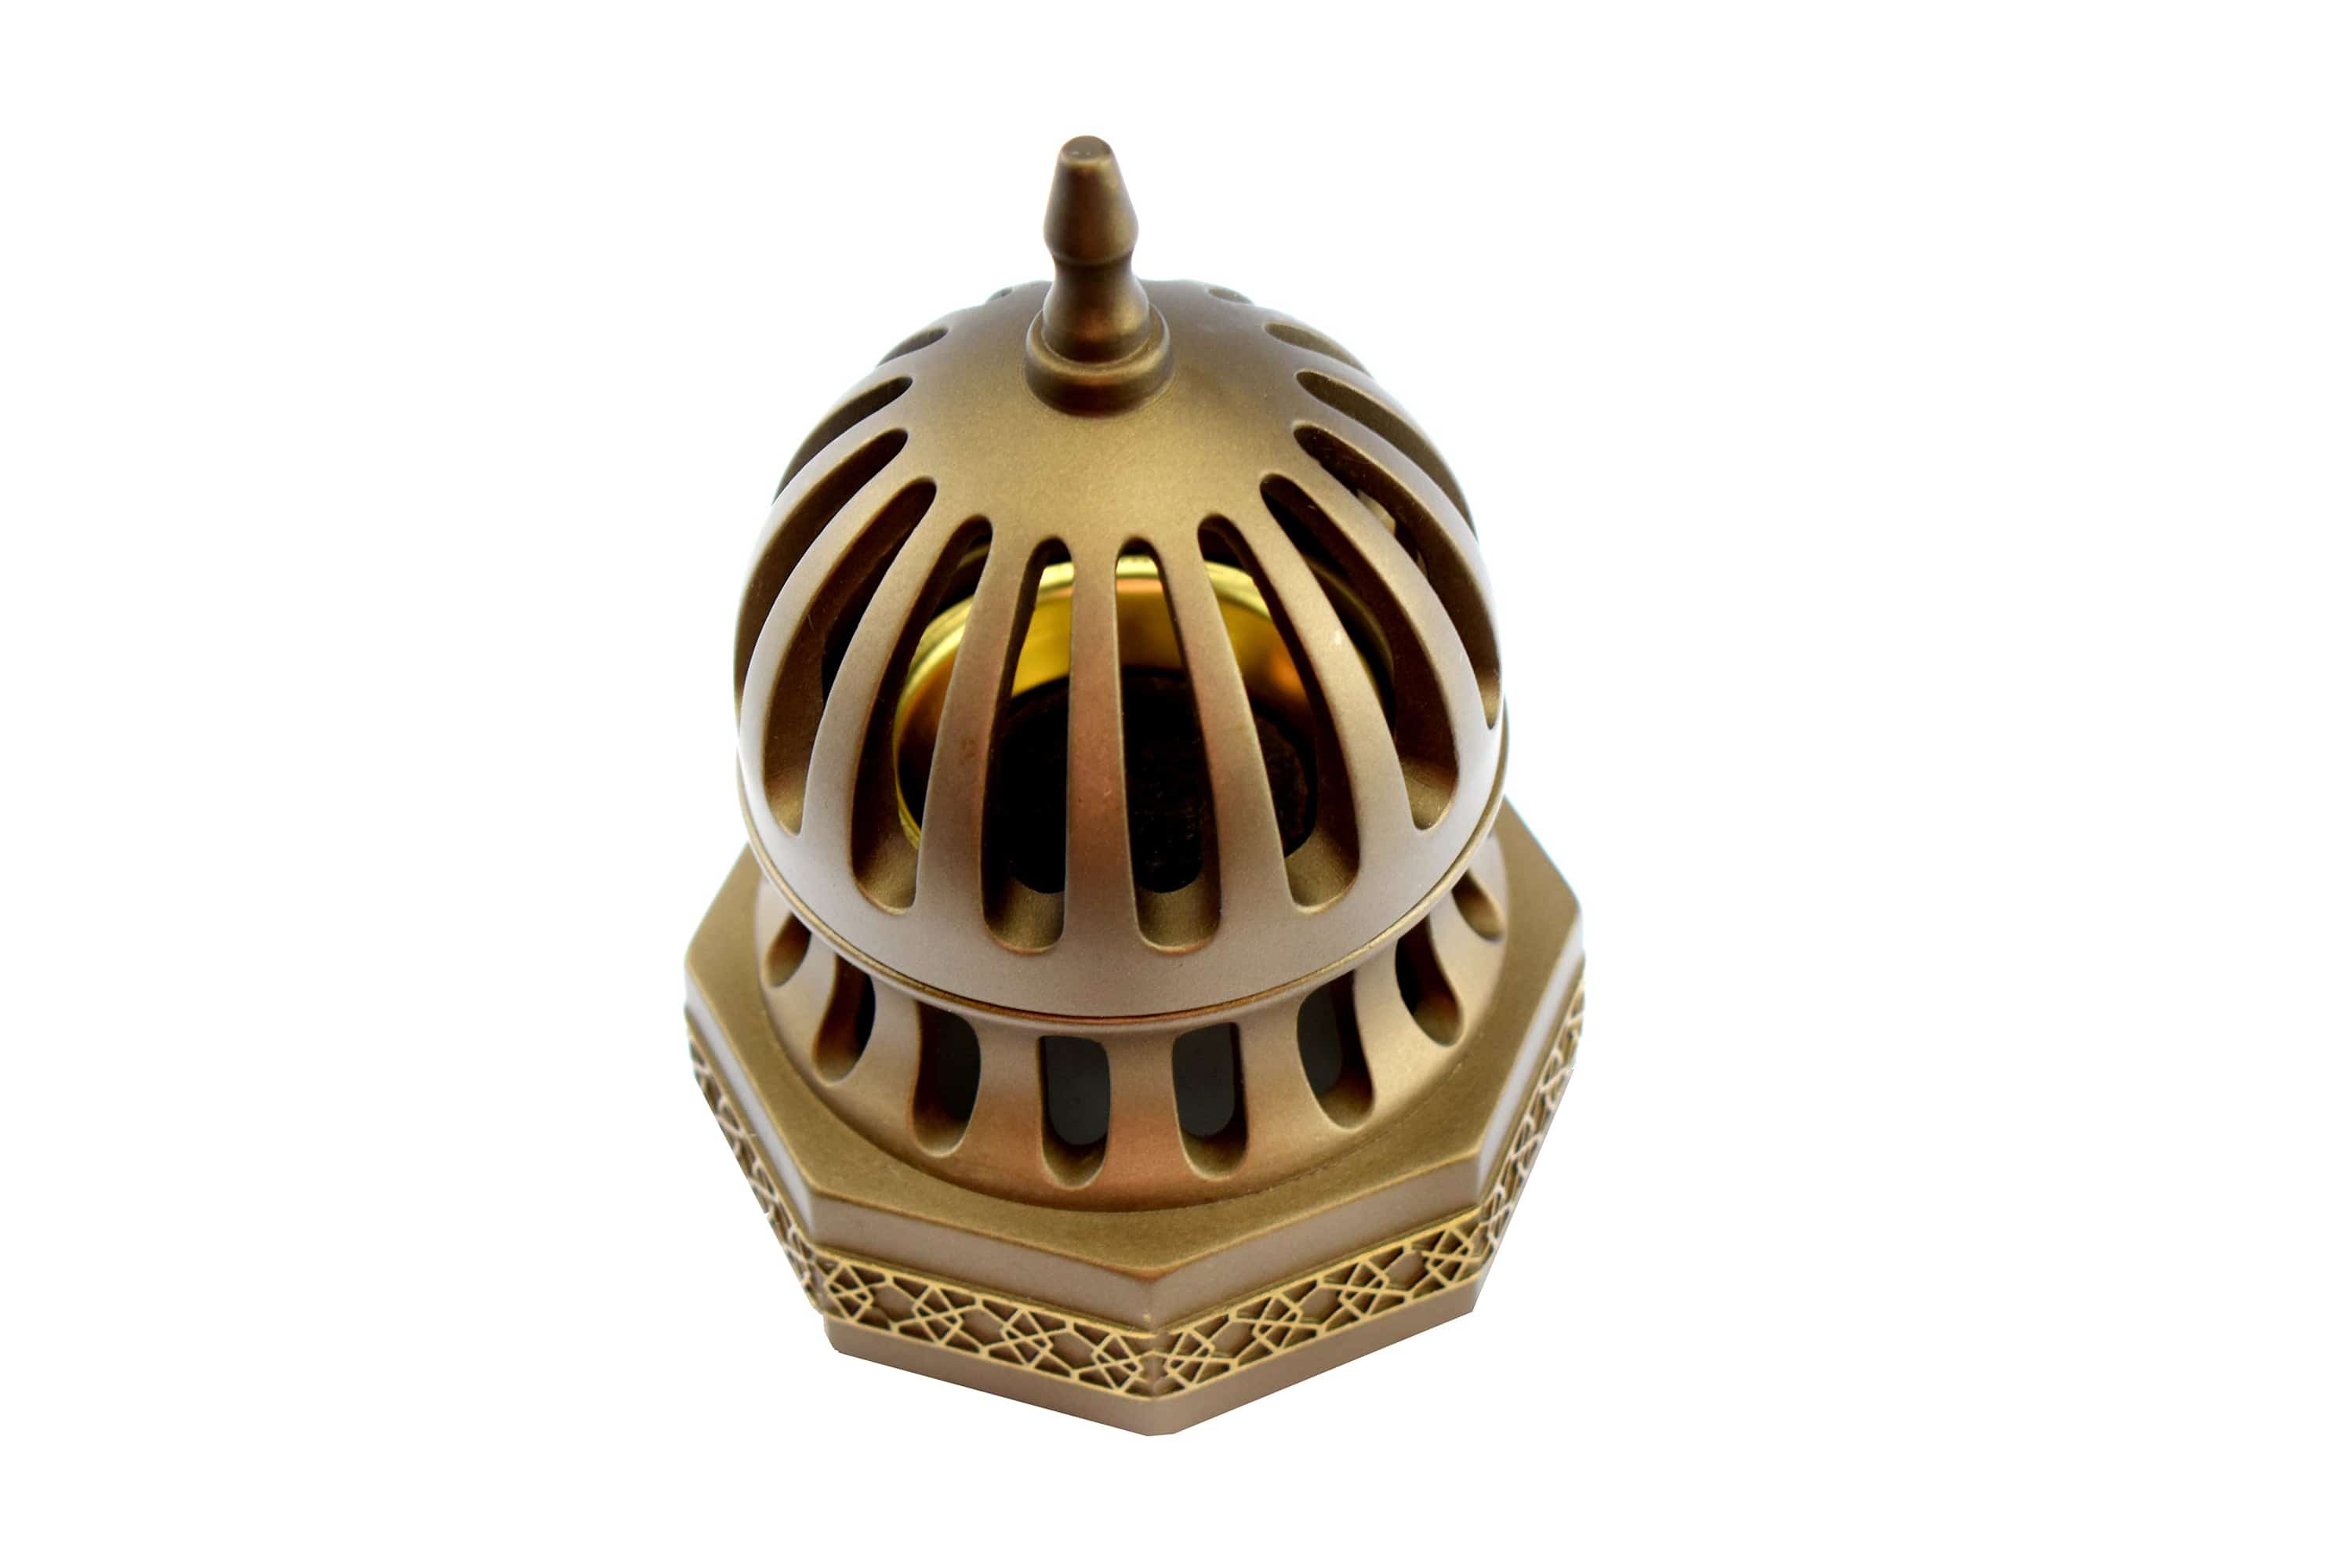 Classic Traditional Dome Style Closed Incense Bakhoor Burner - Gold - Intense oud